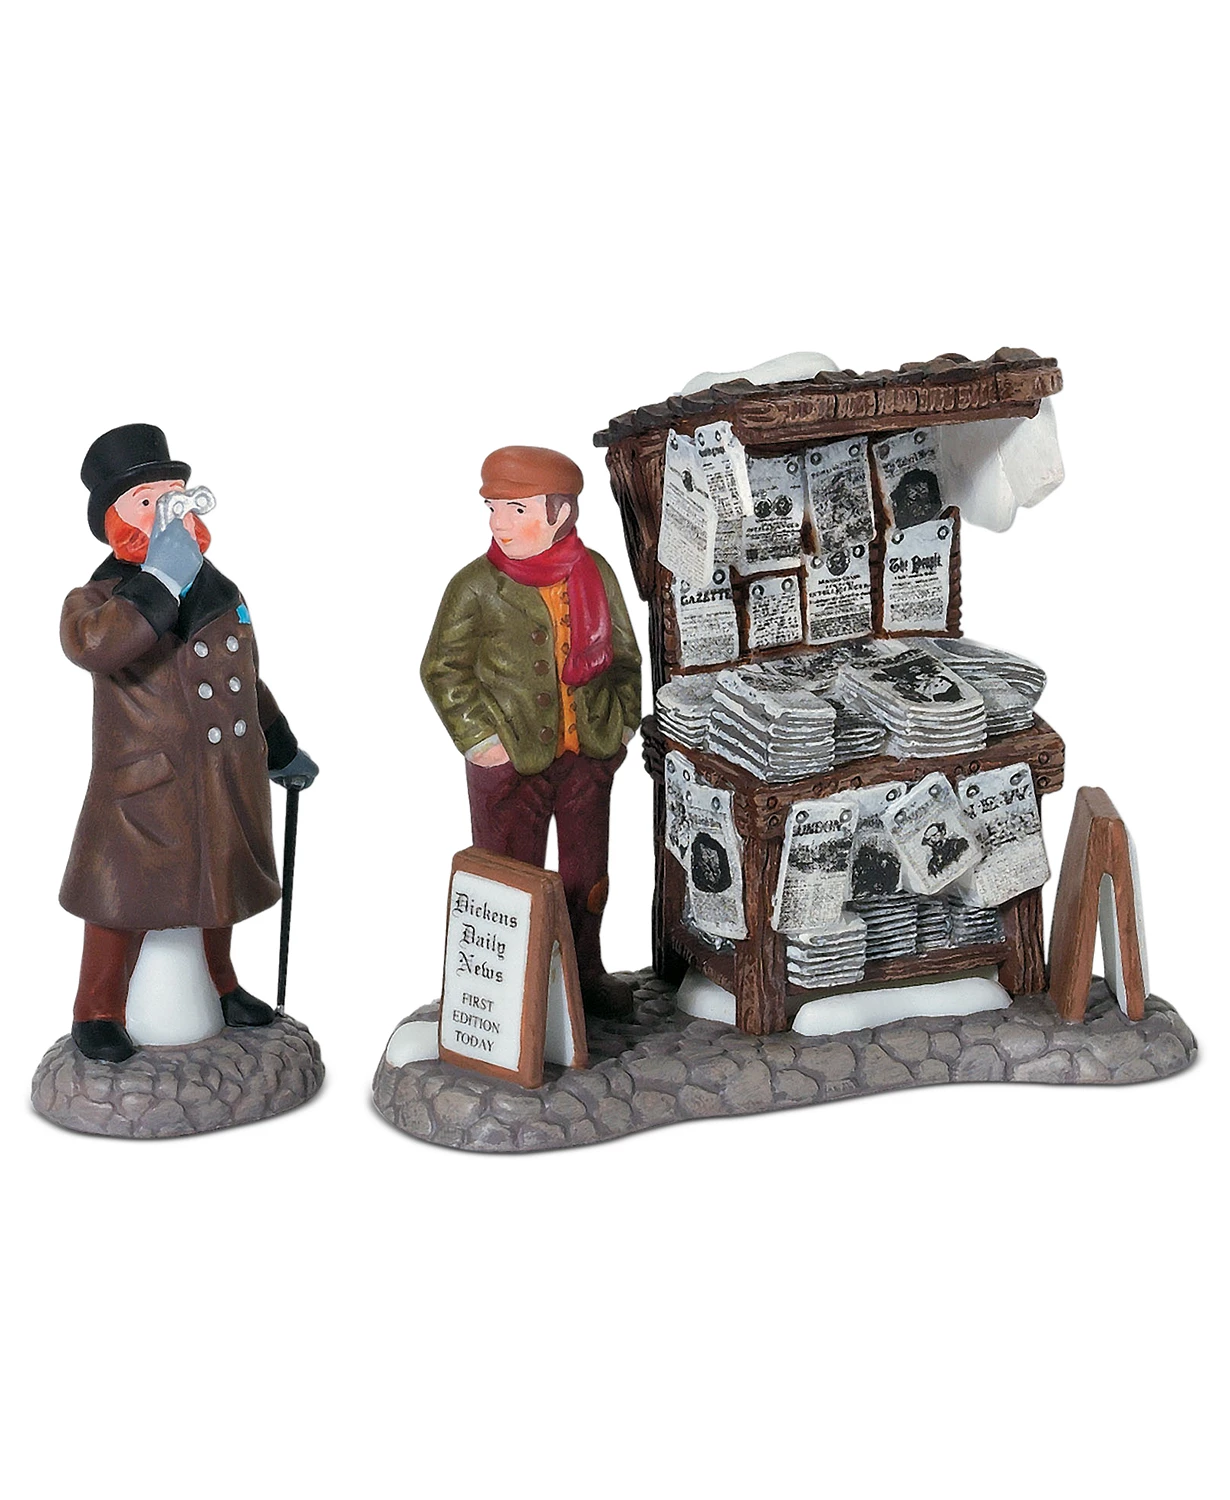 Department 56 Dickens' Village Set of 2 London Newspaper Stand Collectible Figurine